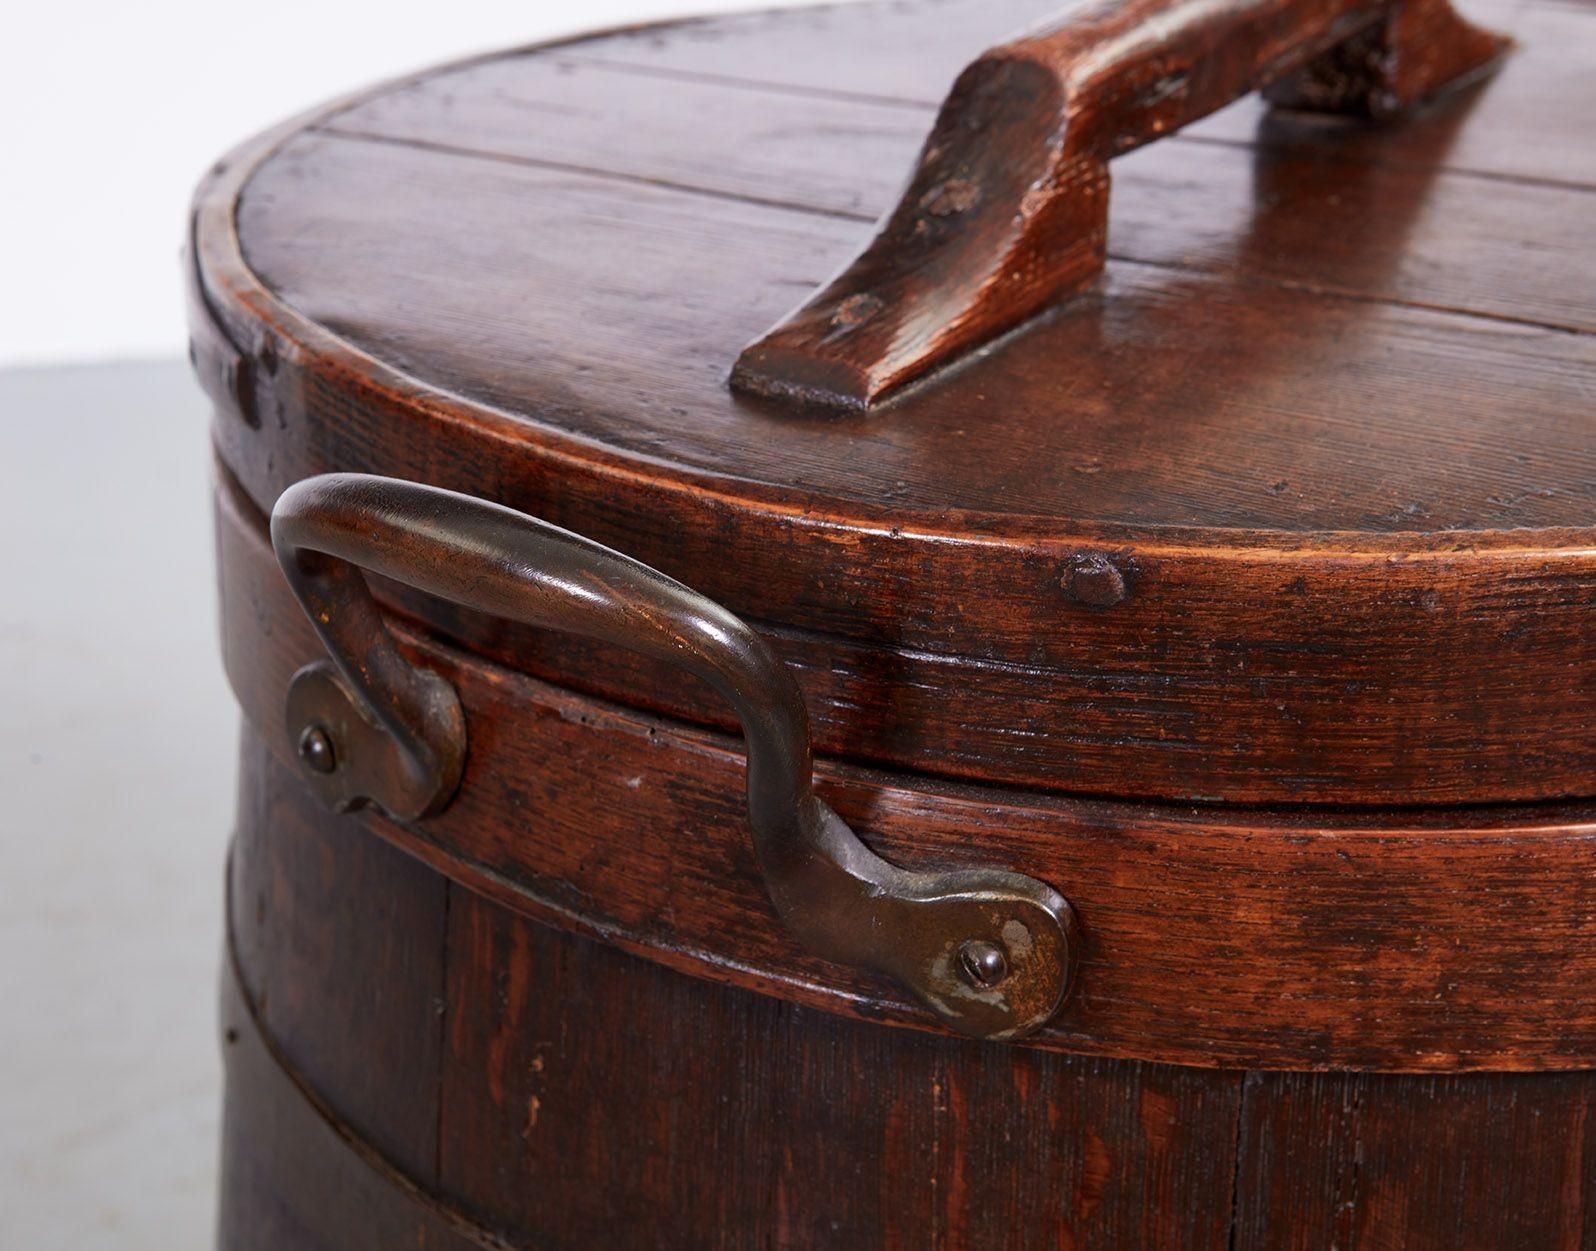 A 19th century oak bin for the storage of hardtack, a type of dense and long-lasting biscuit, on long clipper ship voyages.  The bin is of staved construction, with willow and iron banding, and has a lid with a shaped handle.  It is wider at the